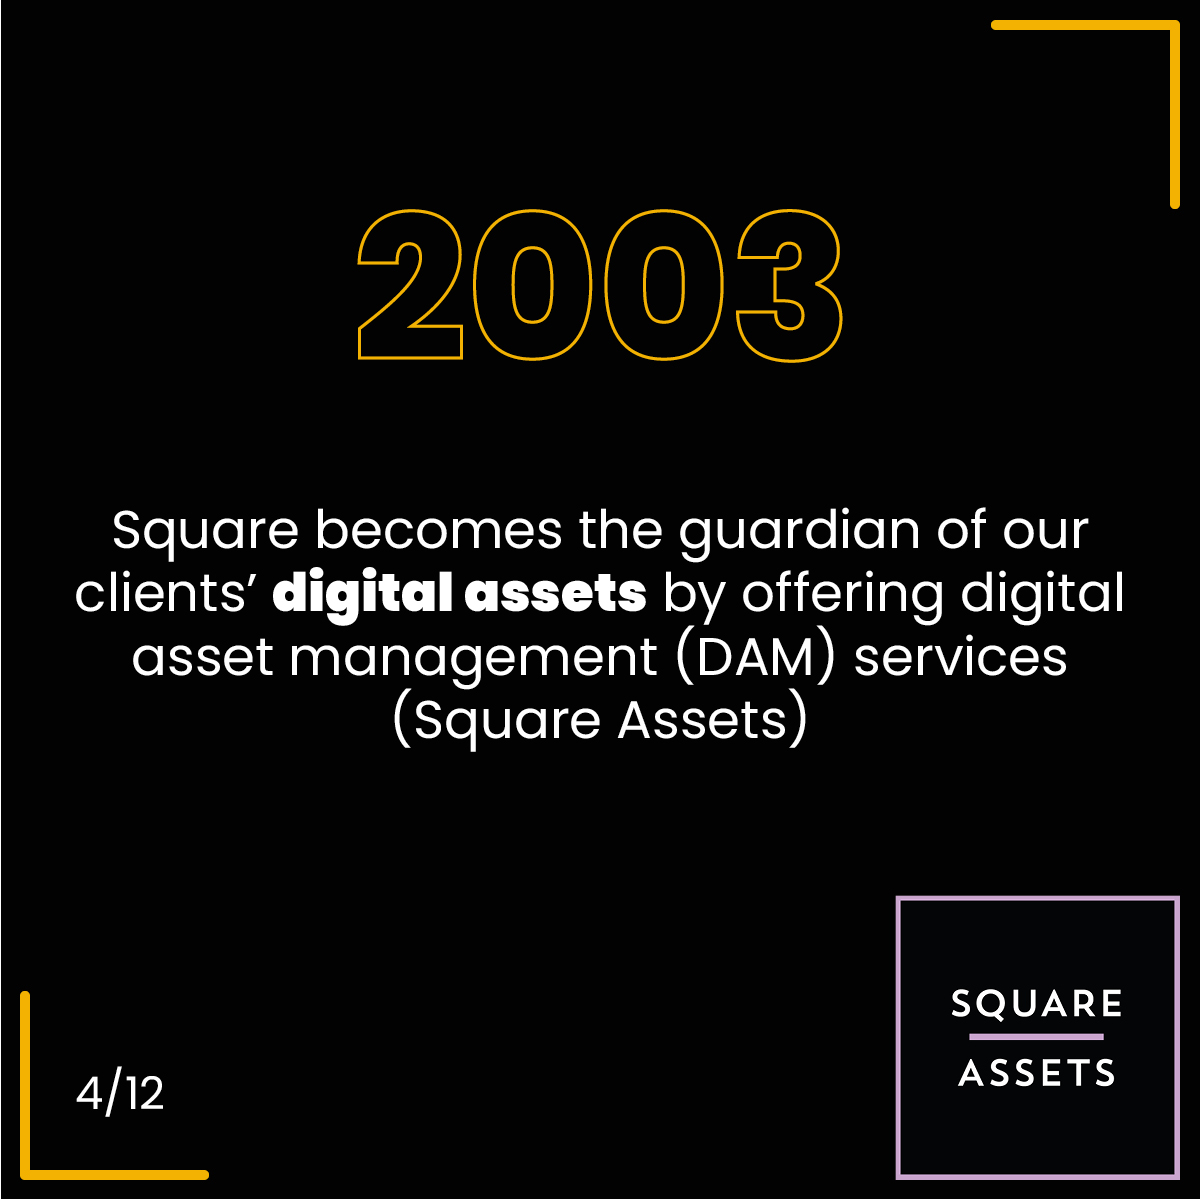 2003, Square becomes the guardian of our clients’ digital assets by offering digital asset management (DAM) services (Square Assets)